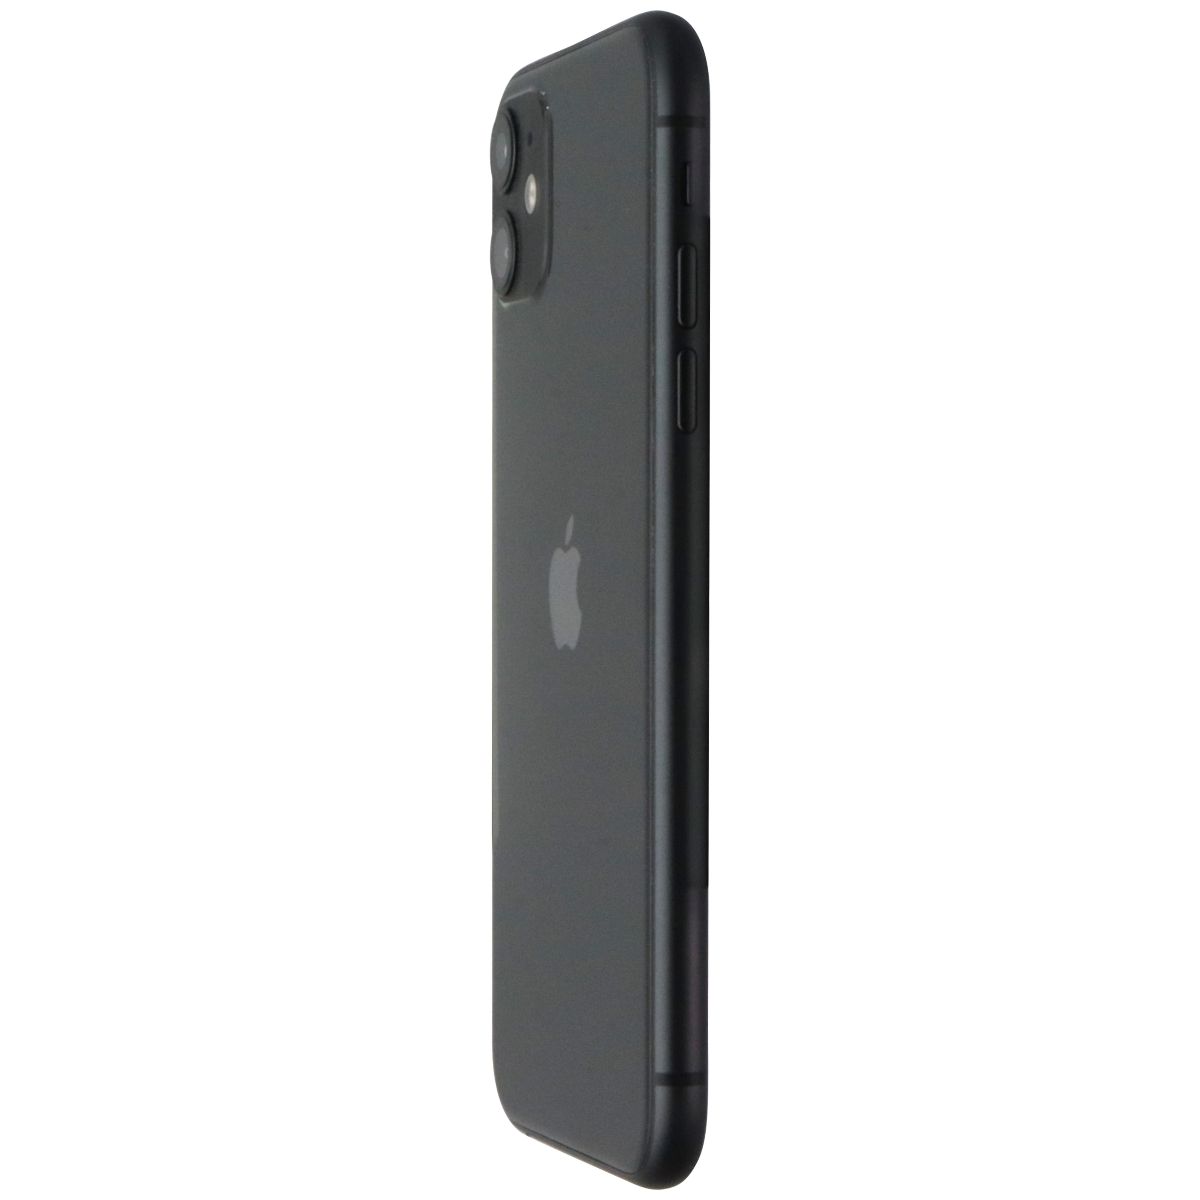 Apple iPhone 11 (6.1-inch) Smartphone (A2111) SPECTRUM ONLY - 64GB / Black Cell Phones & Smartphones Apple    - Simple Cell Bulk Wholesale Pricing - USA Seller